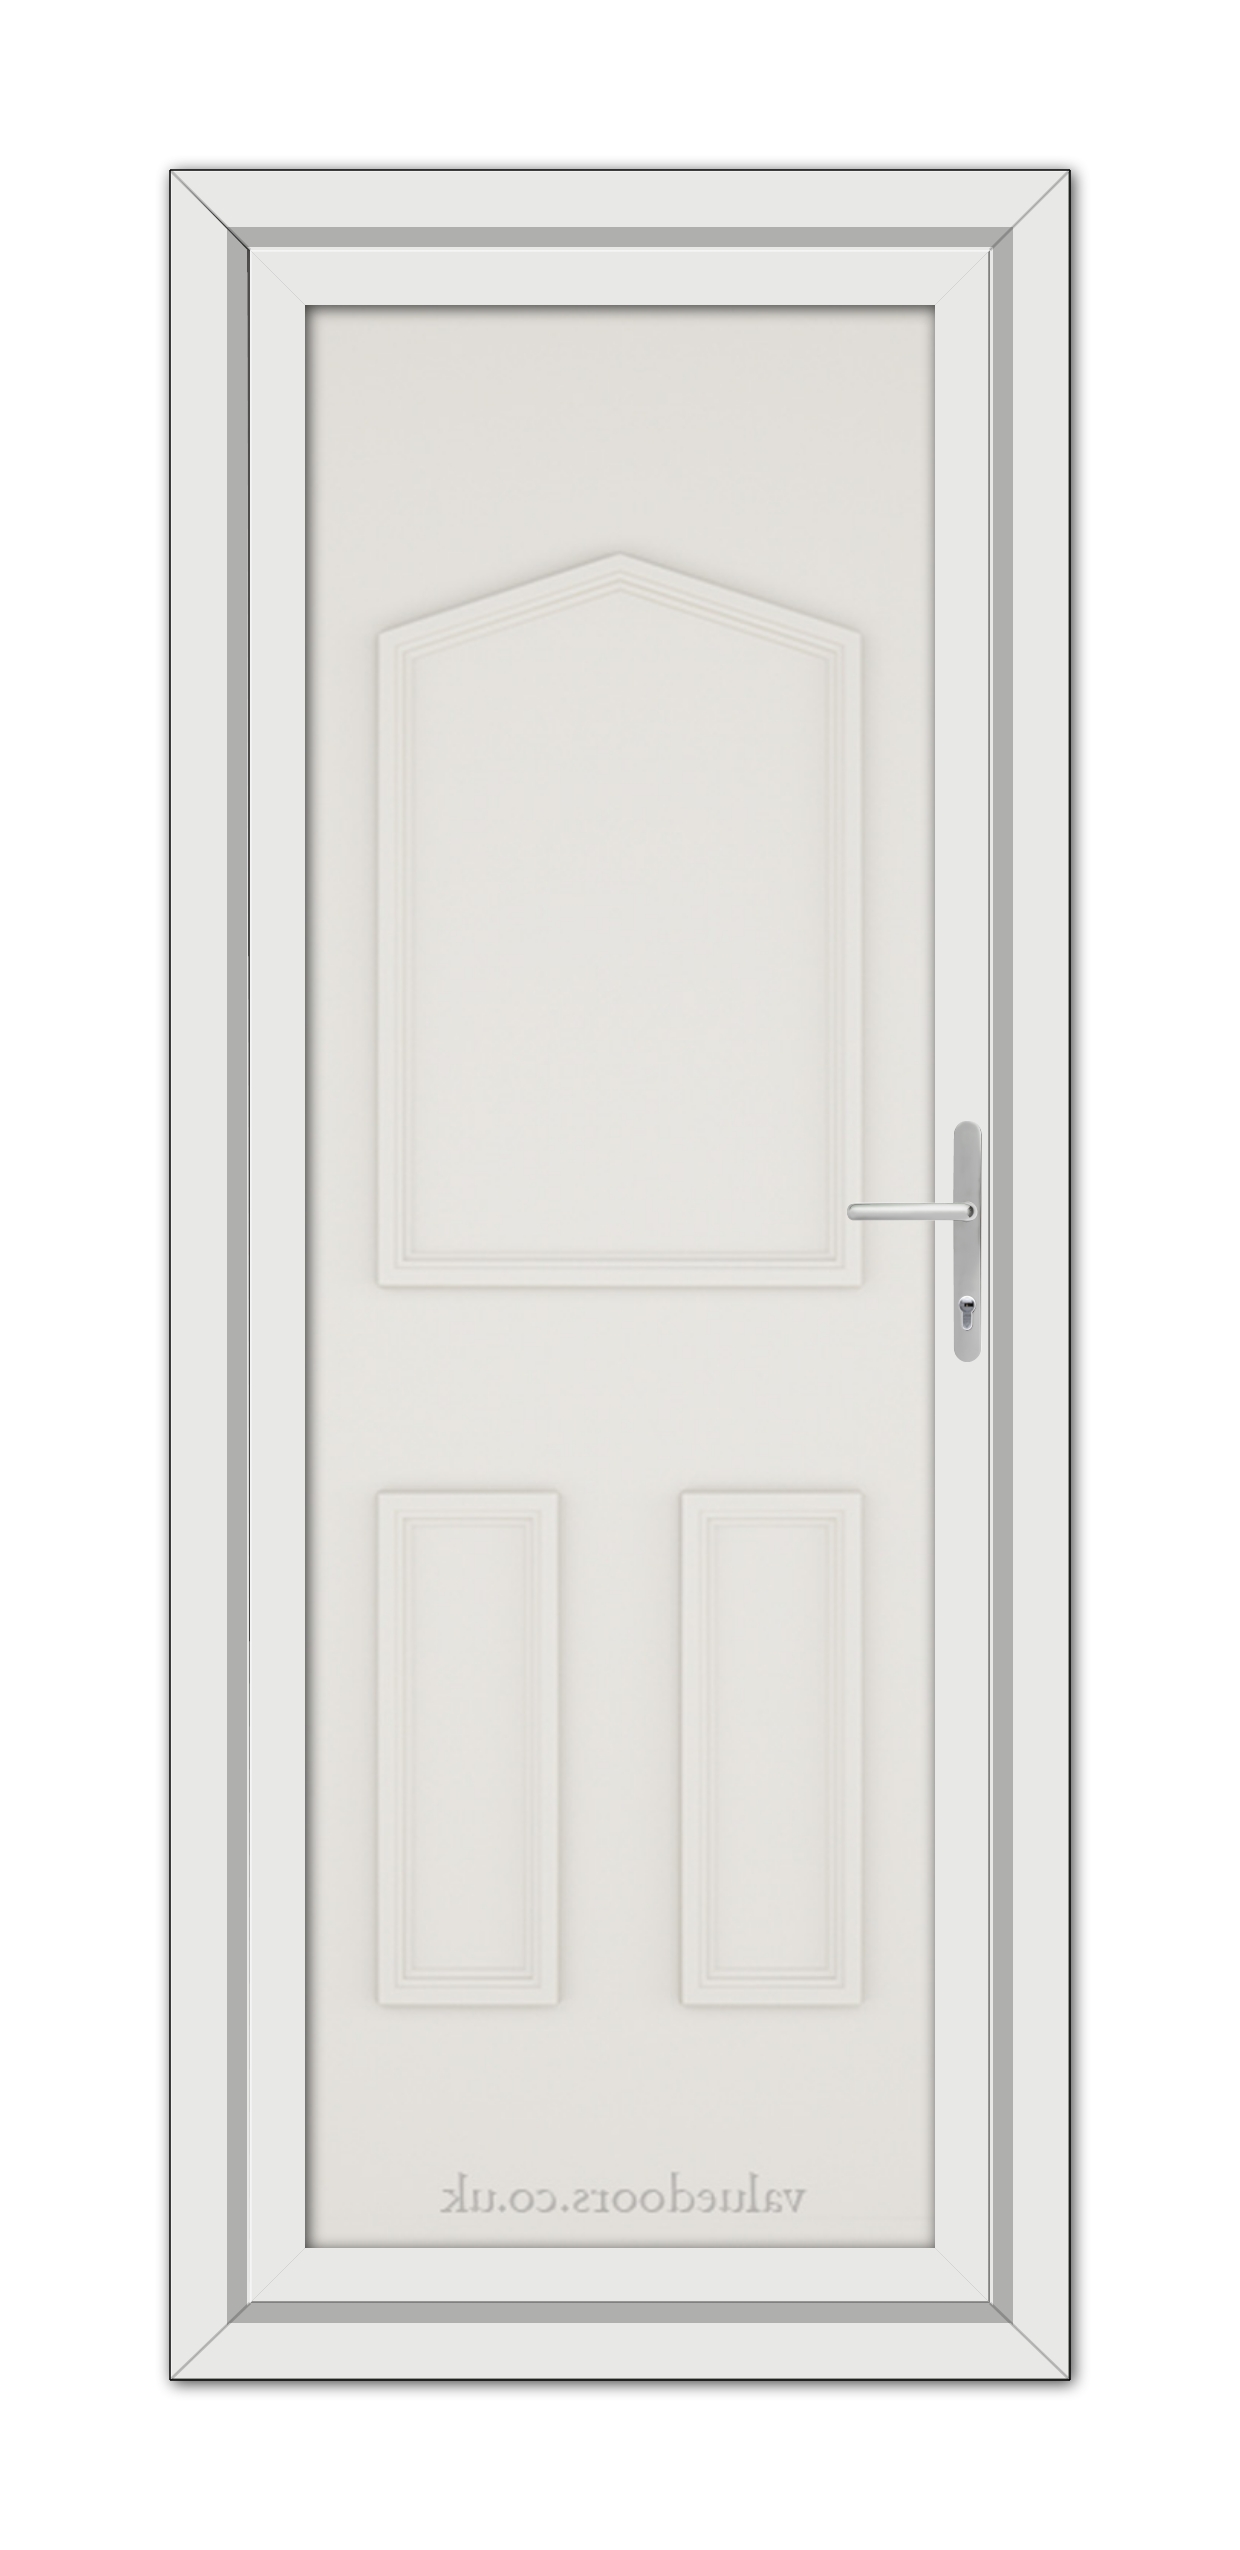 A White Cream Oxford Solid uPVC door with a silver handle.